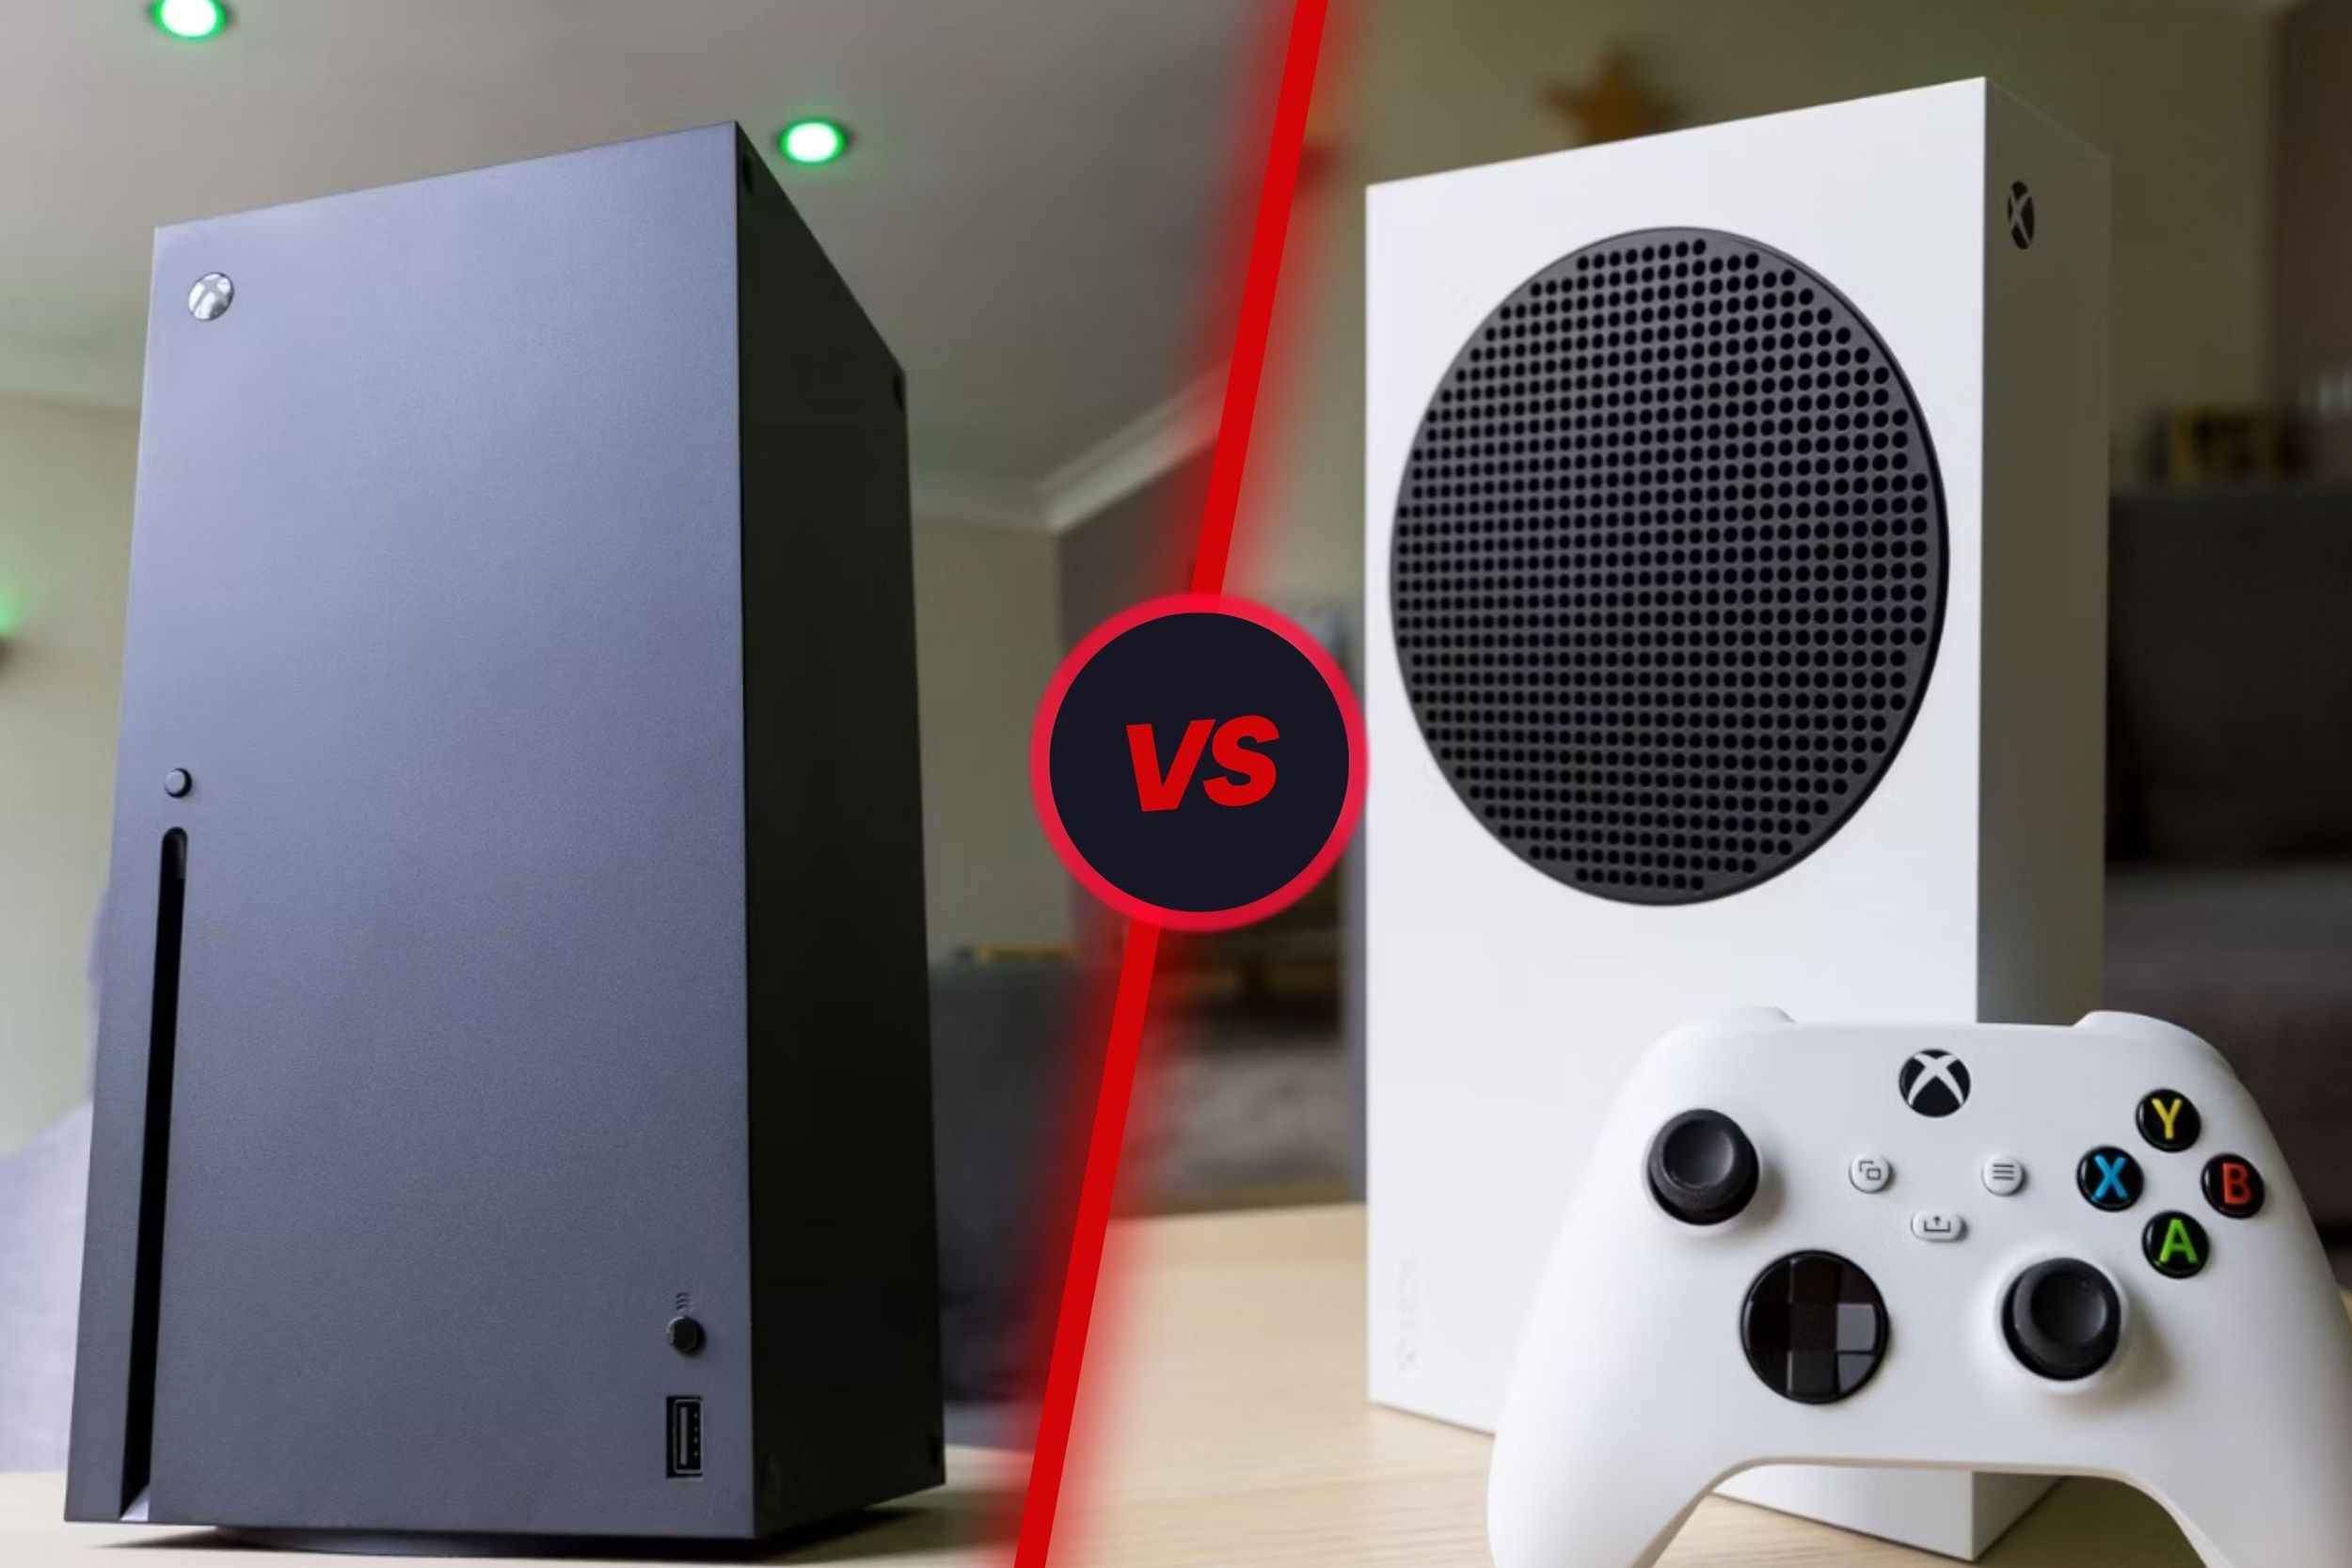 Xbox Series X vs Xbox Series S: What's the difference?